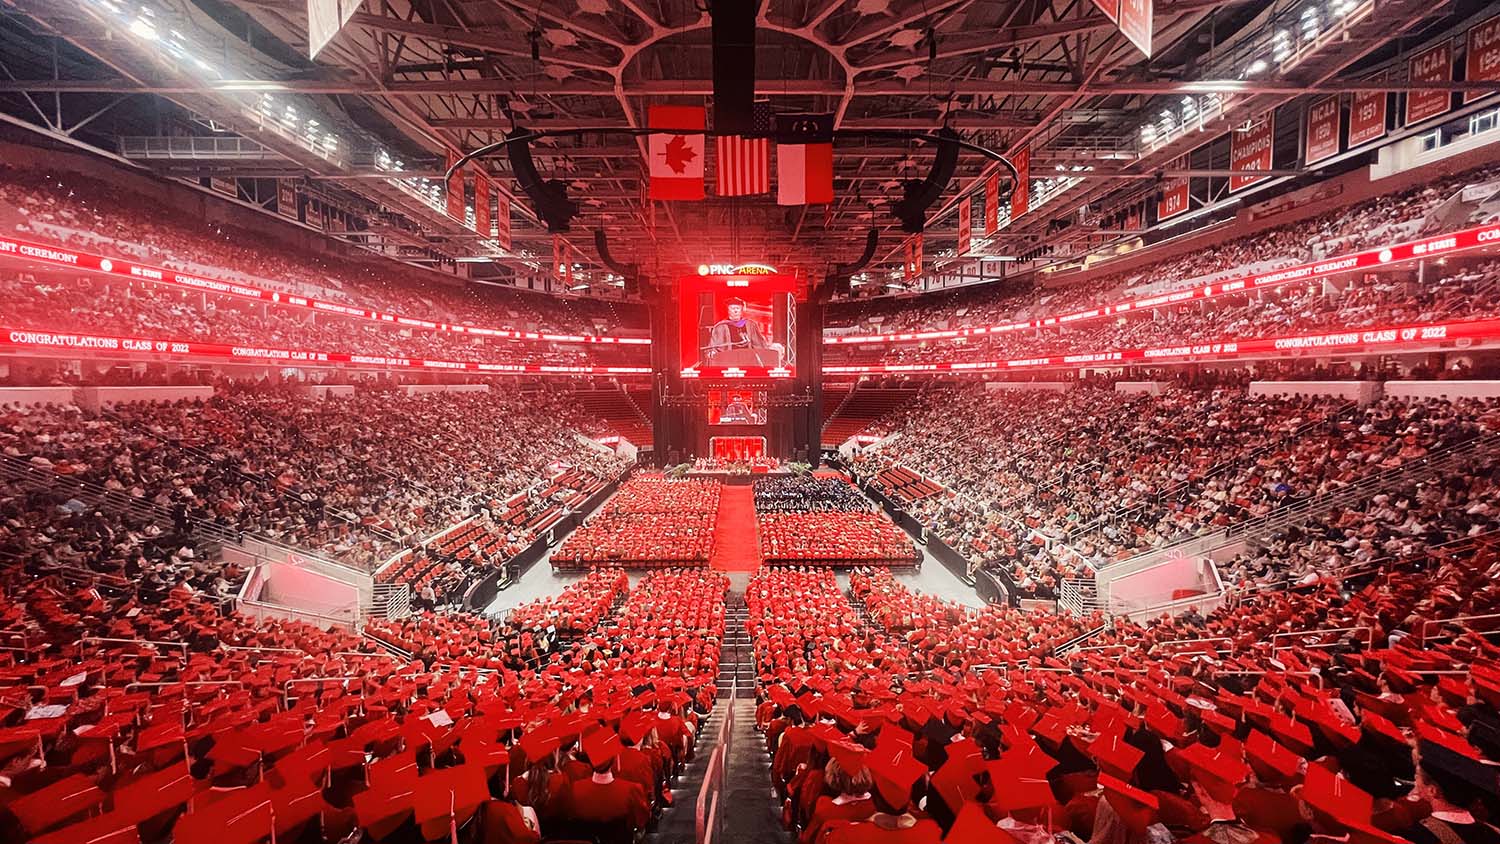 A sea of red caps in PNC Arena for graduation.